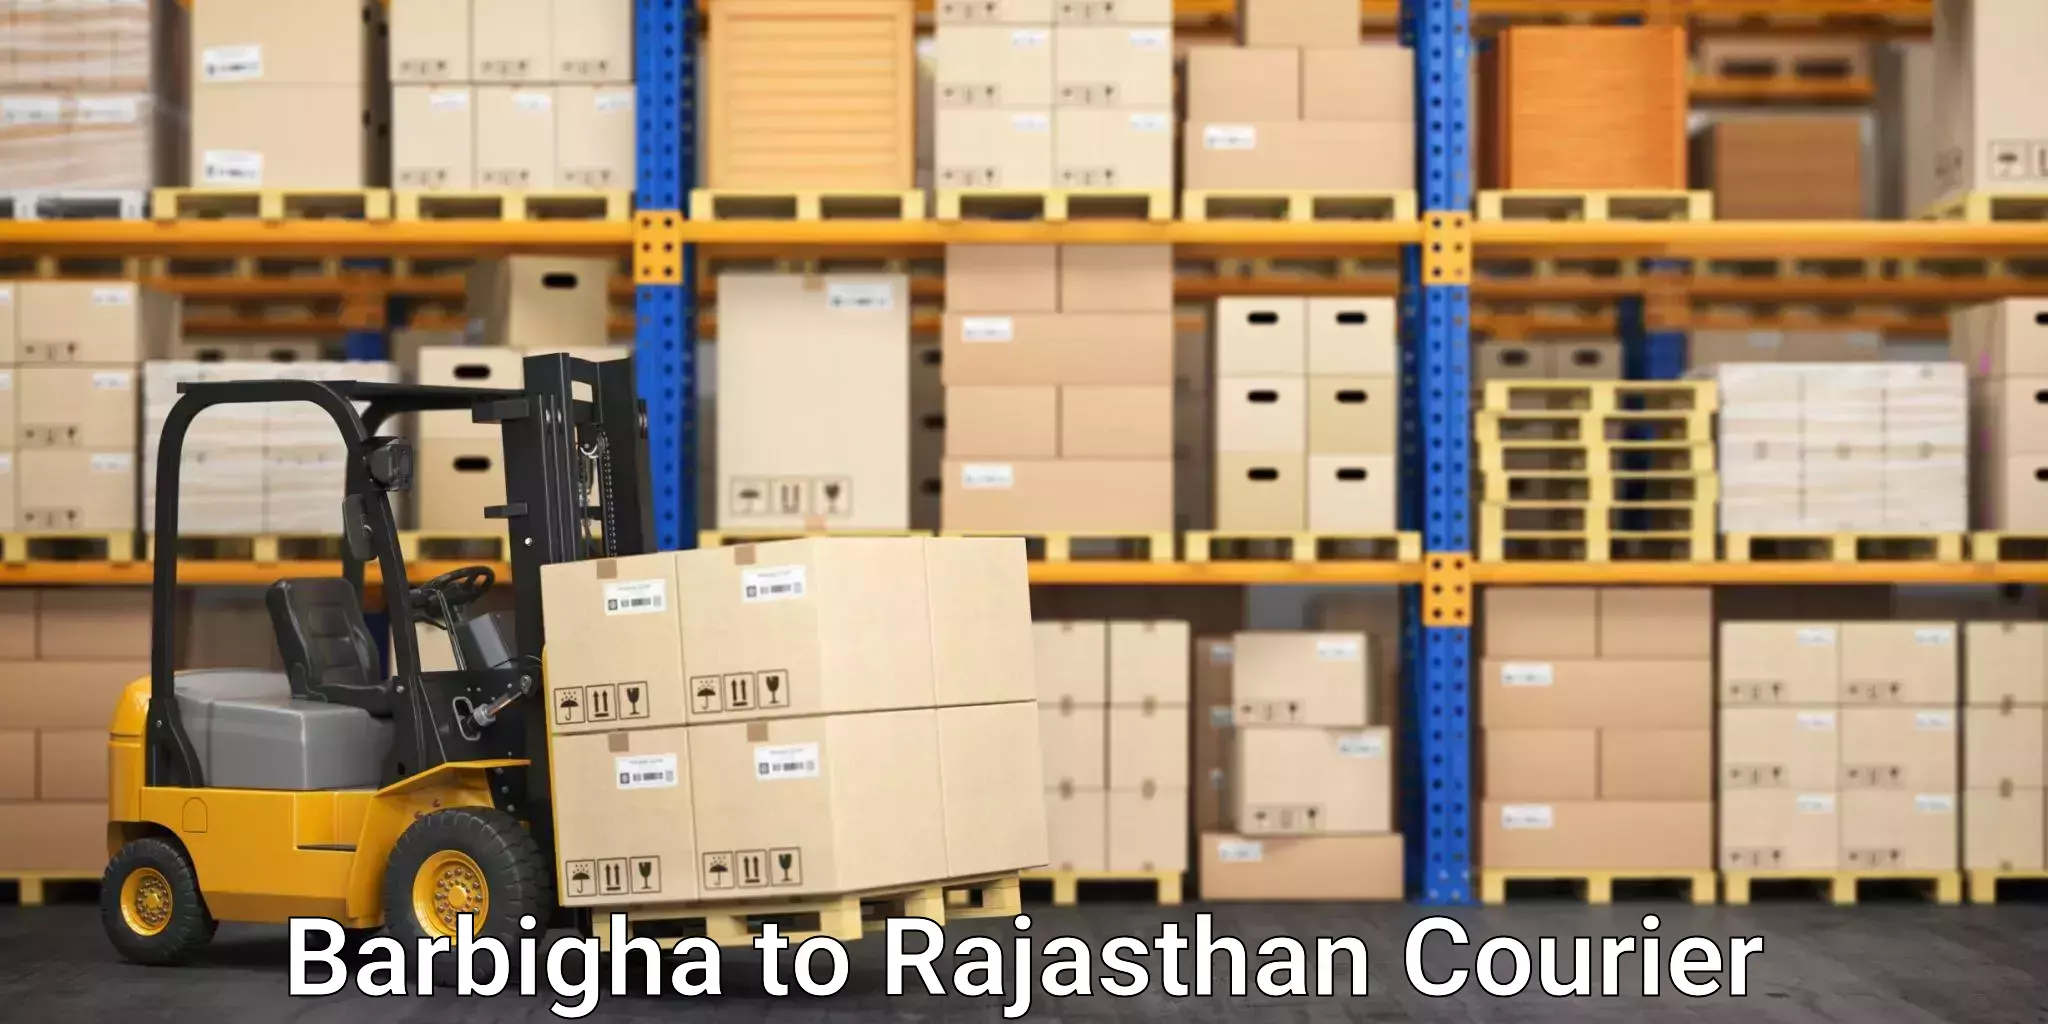 Moving and handling services Barbigha to Rajasthan